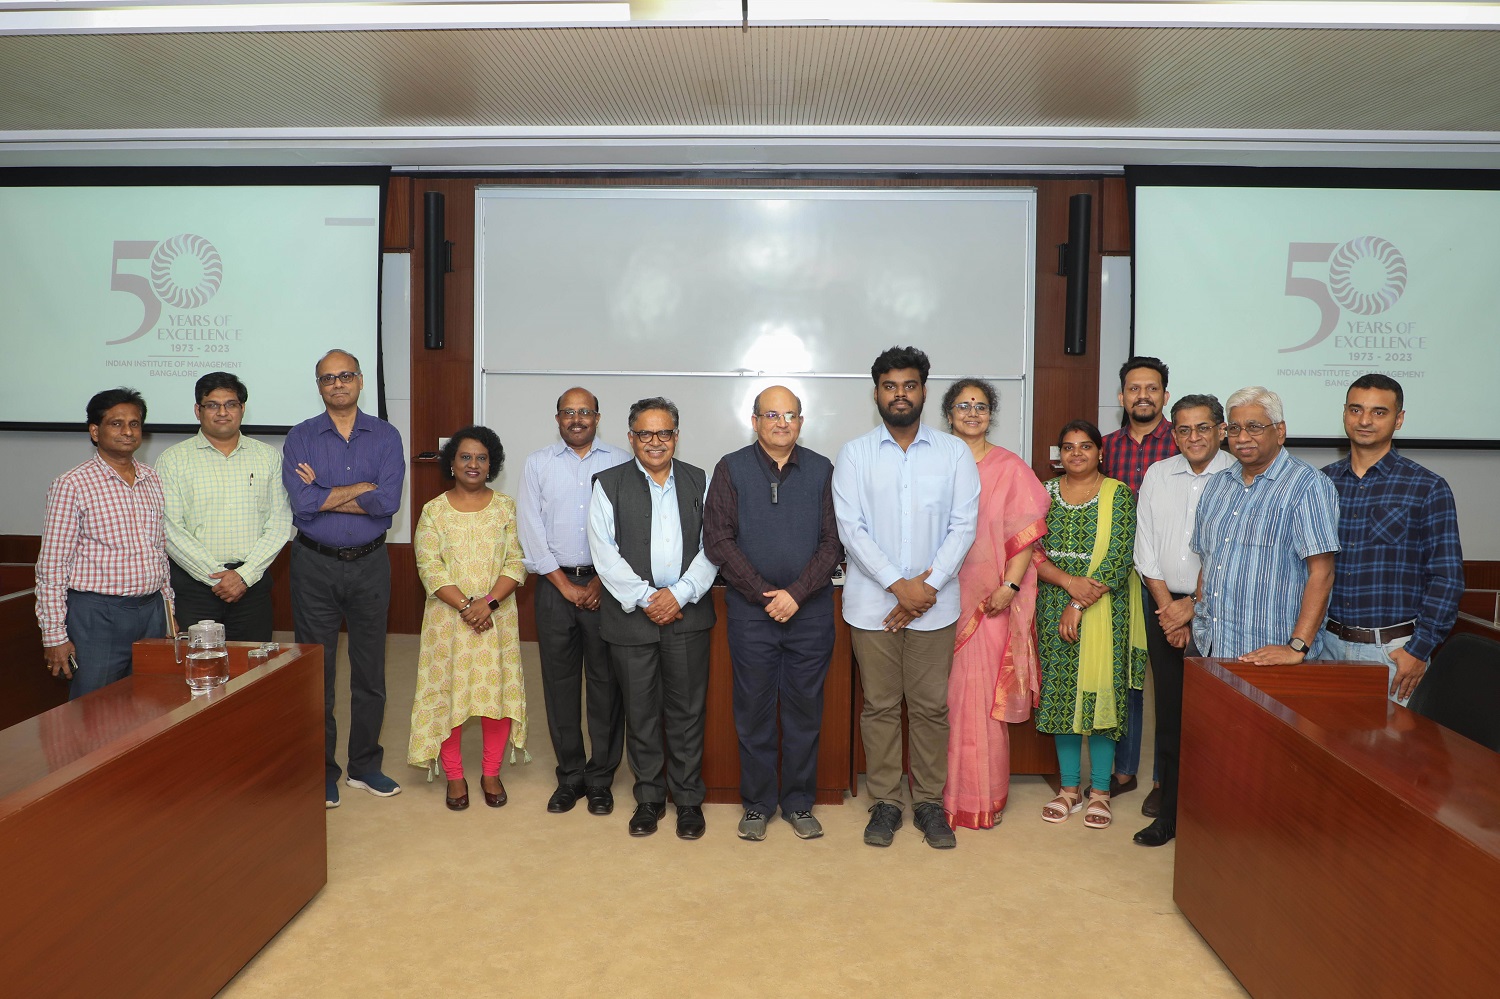 Prof. Rishikesha T Krishnan, Director, IIMB (seventh from left), with members of the faculty, staff and students at the Golden Jubilee logo launch event